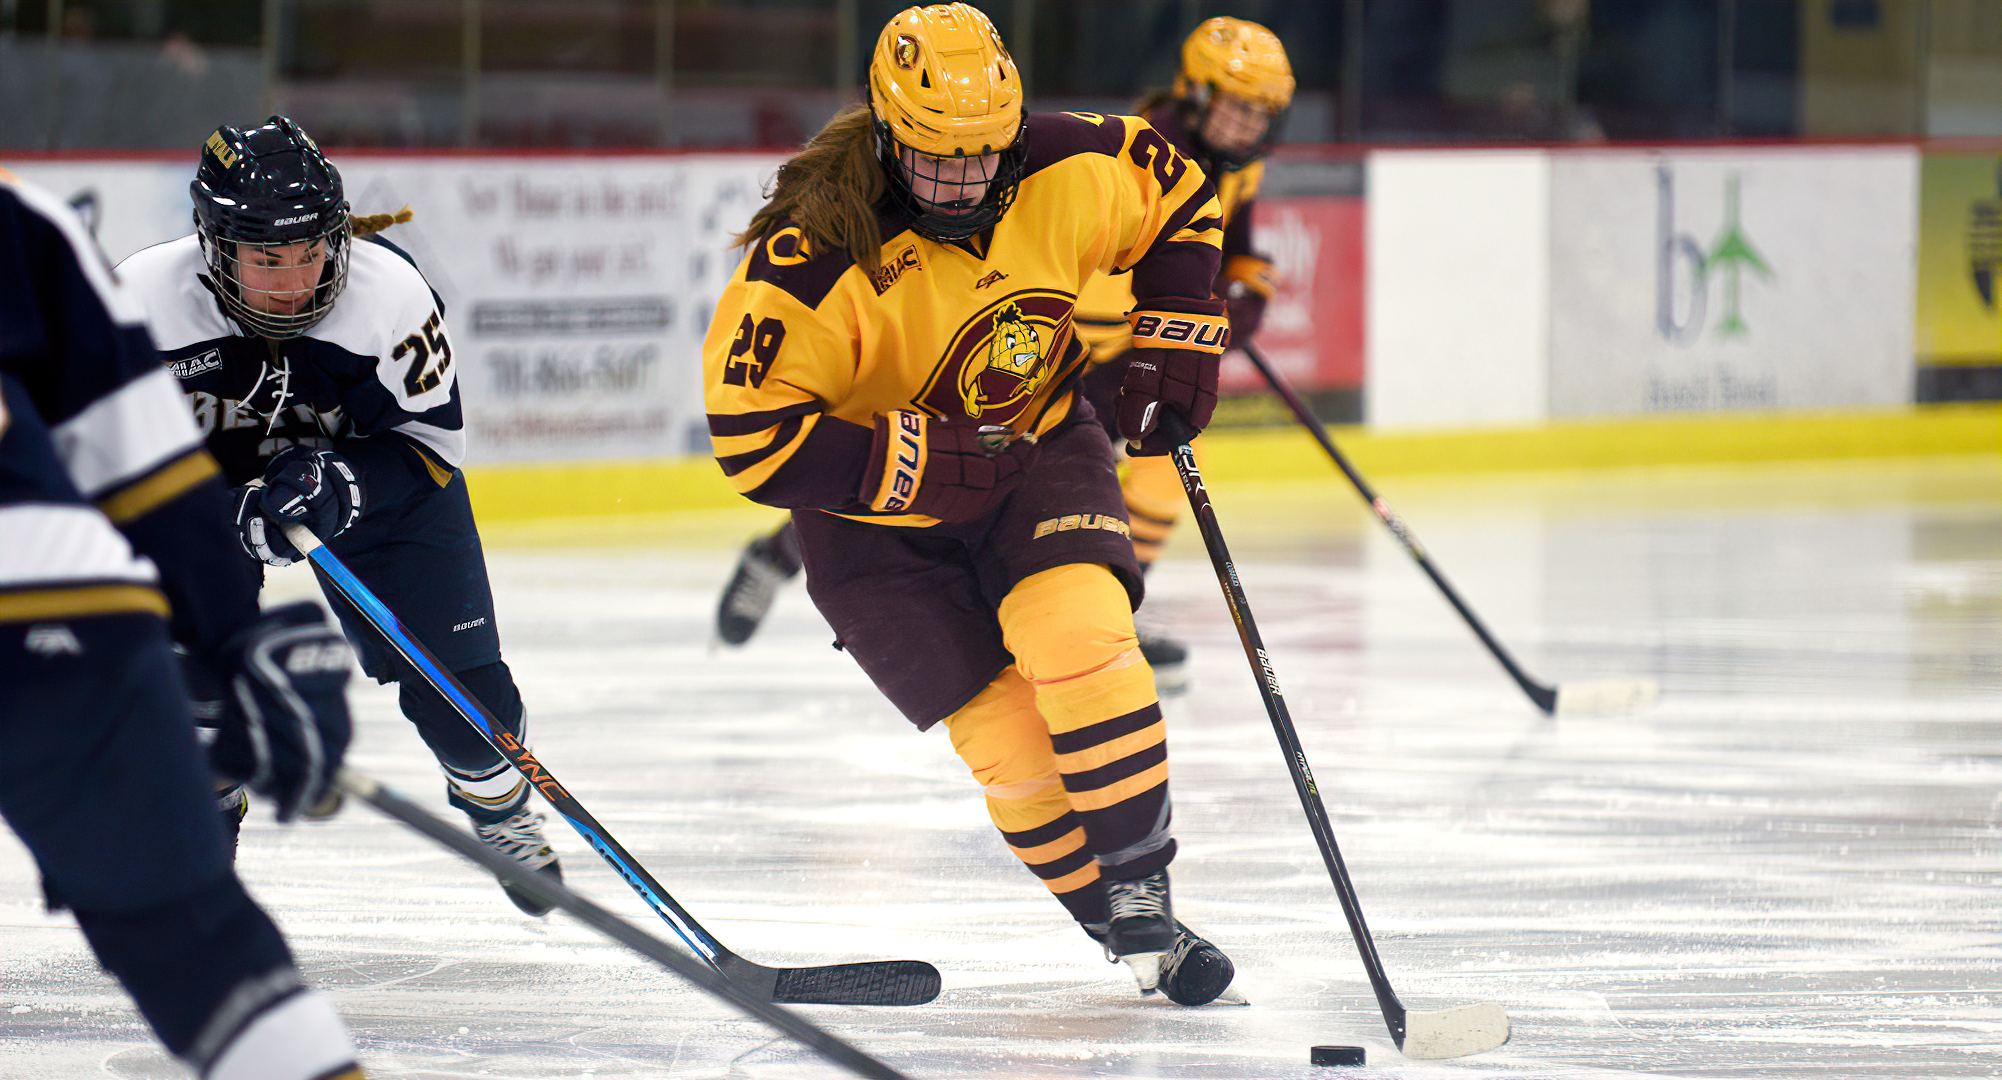 Jerica Friese carries the puck up the ice against Bethel. She  scored the game-winning goal in overtime in the Cobbers' 3-2 victory over Bethel.